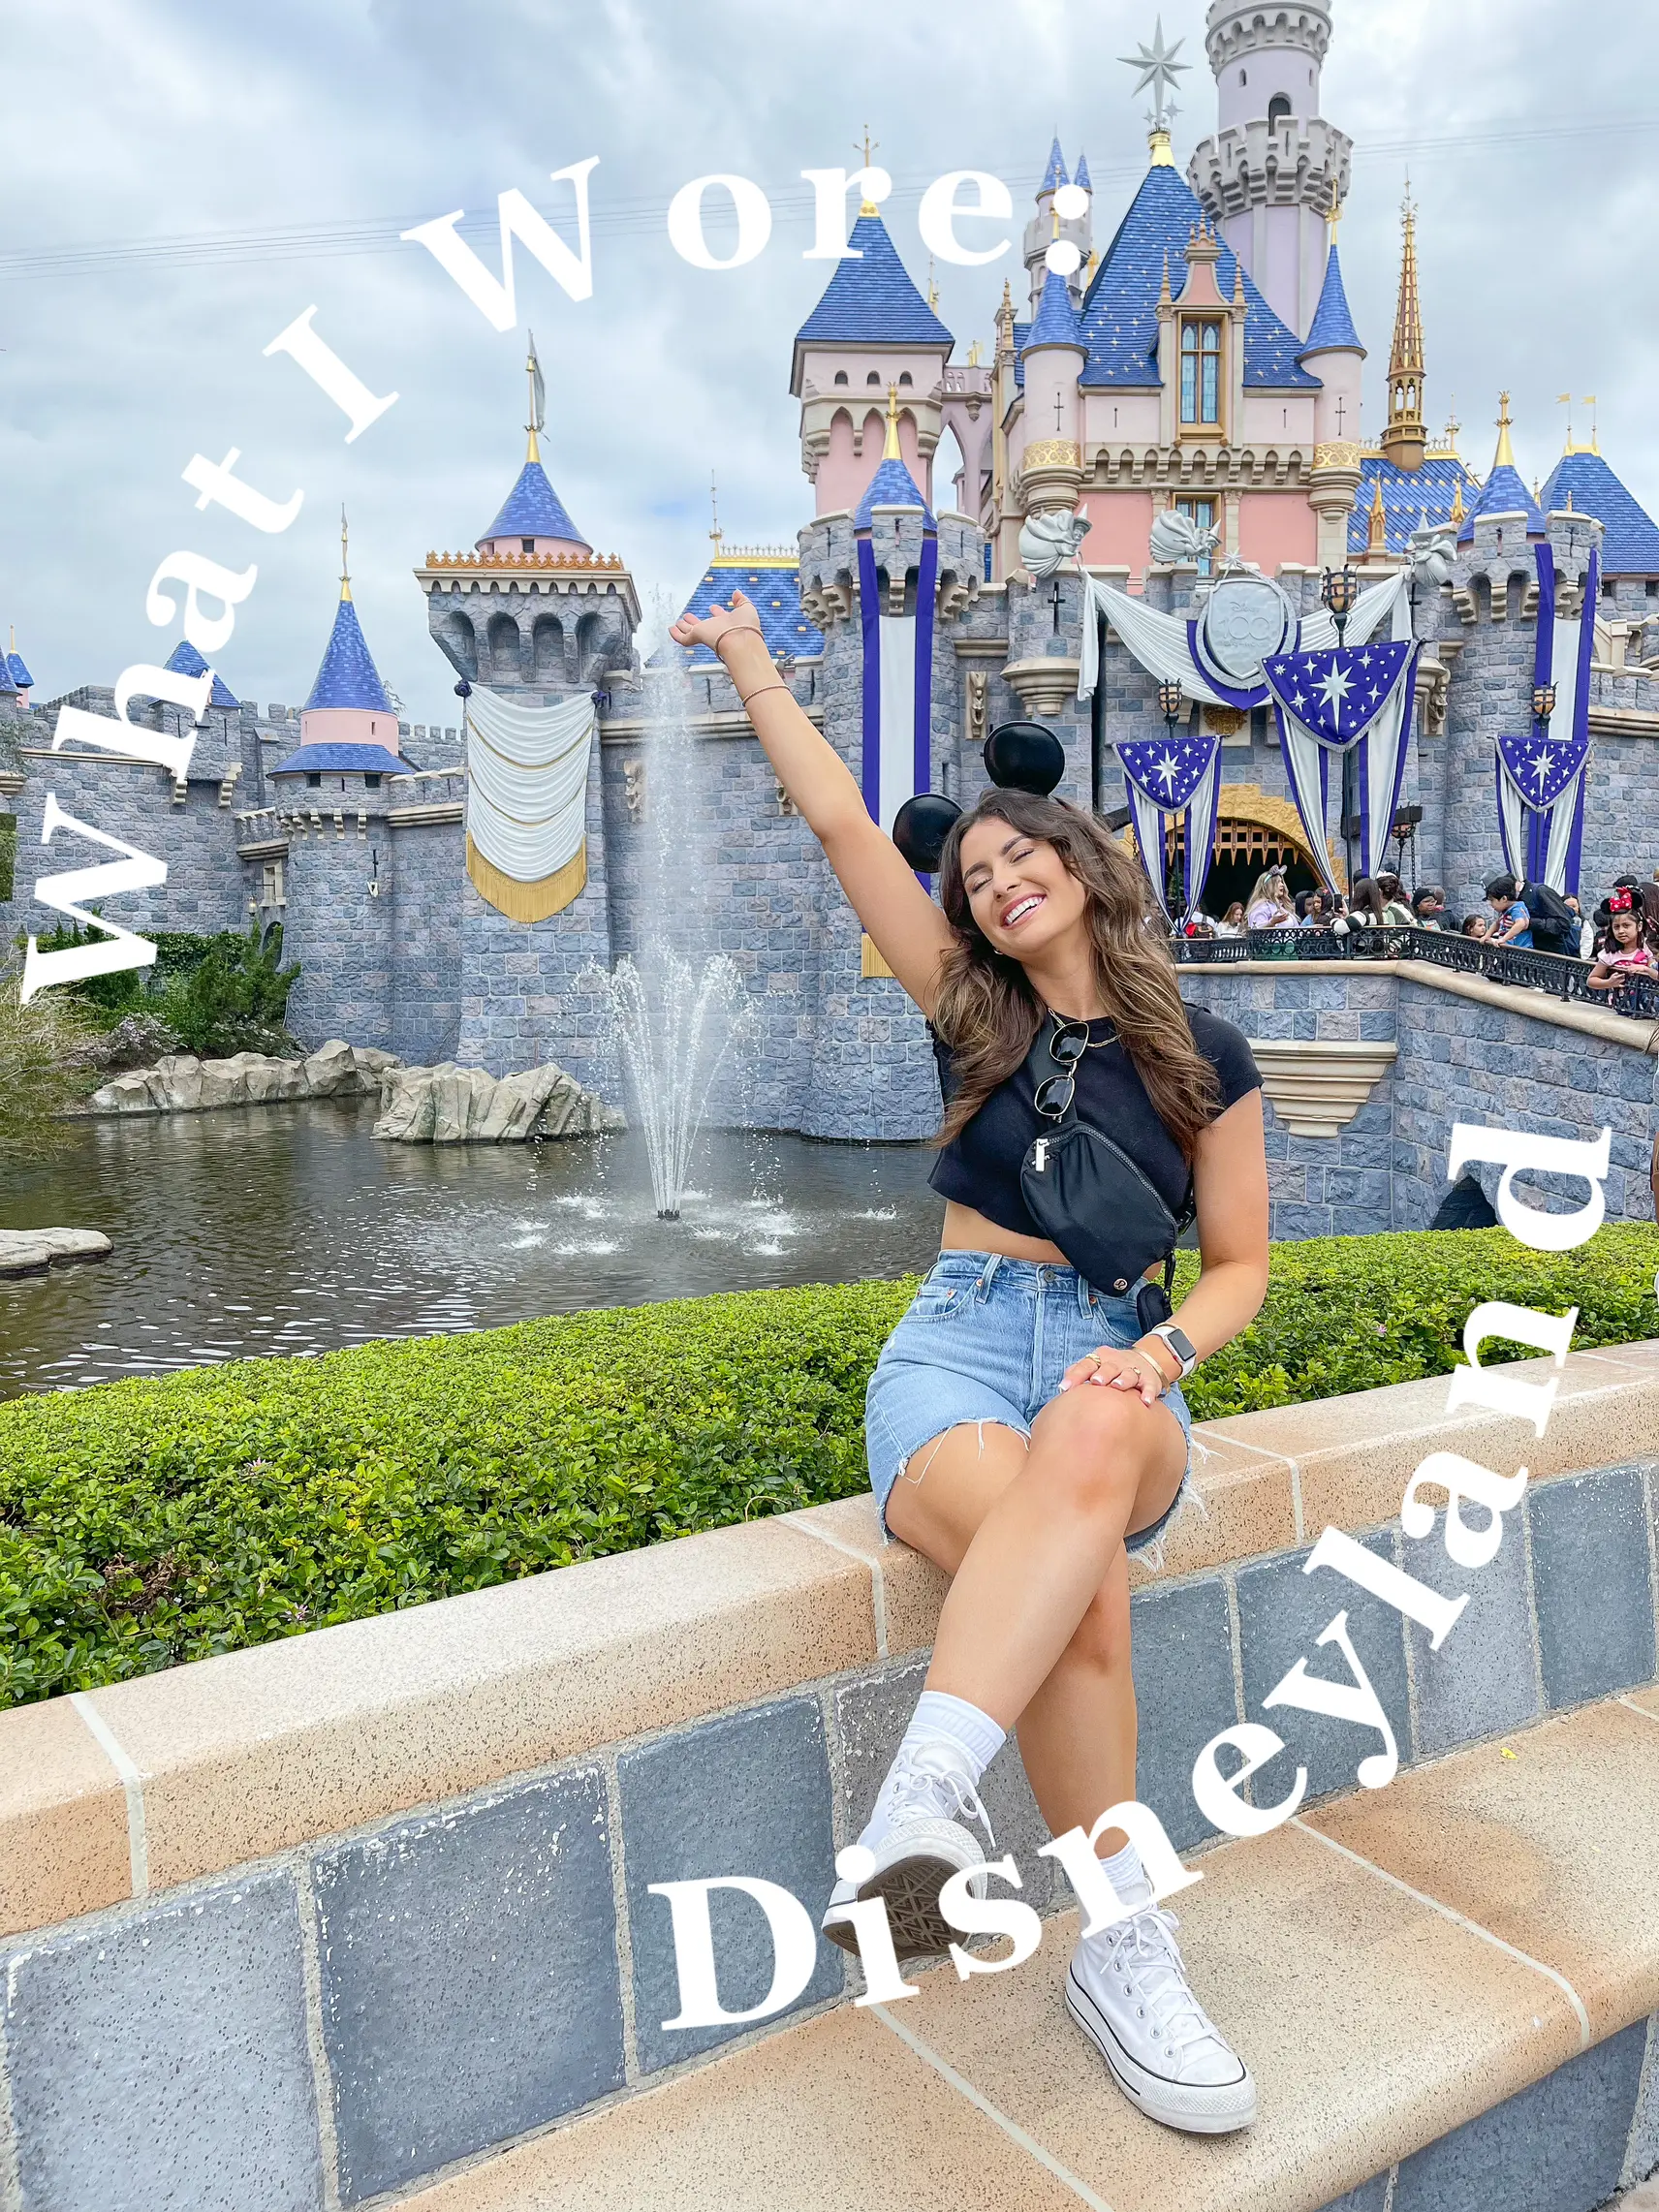 4 Stylish Outfits Fashion Girls Wear to Disneyland  Disney outfits women, Disneyland  outfit spring, Theme park outfits